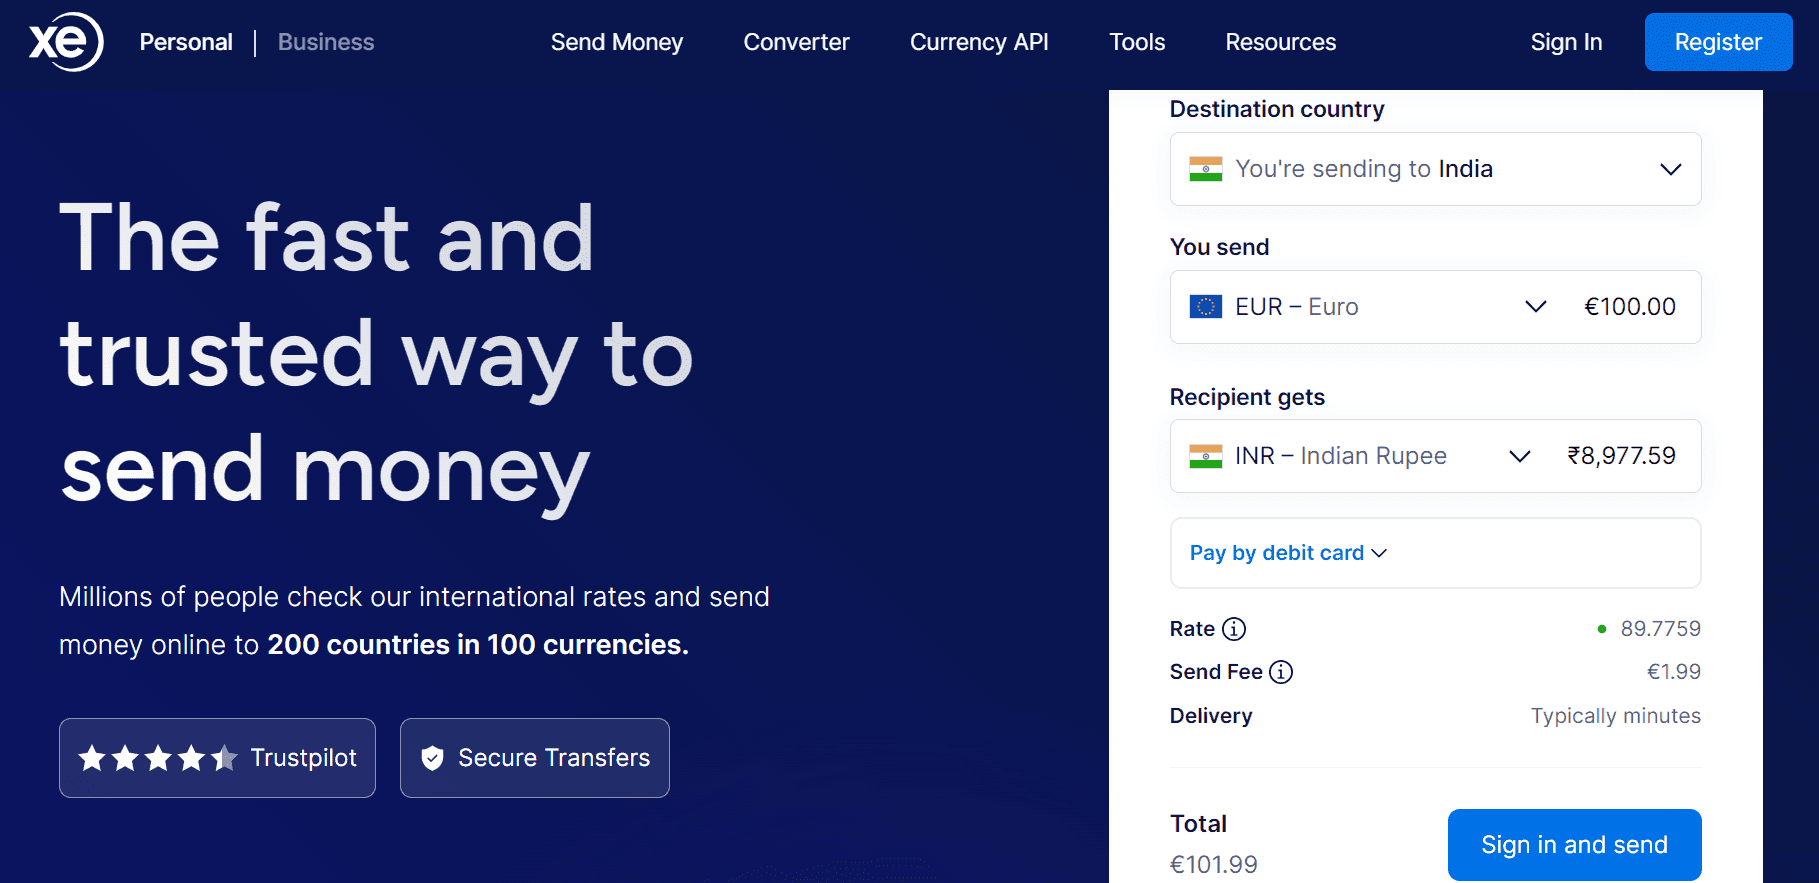 Send money from Malta to India like a pro